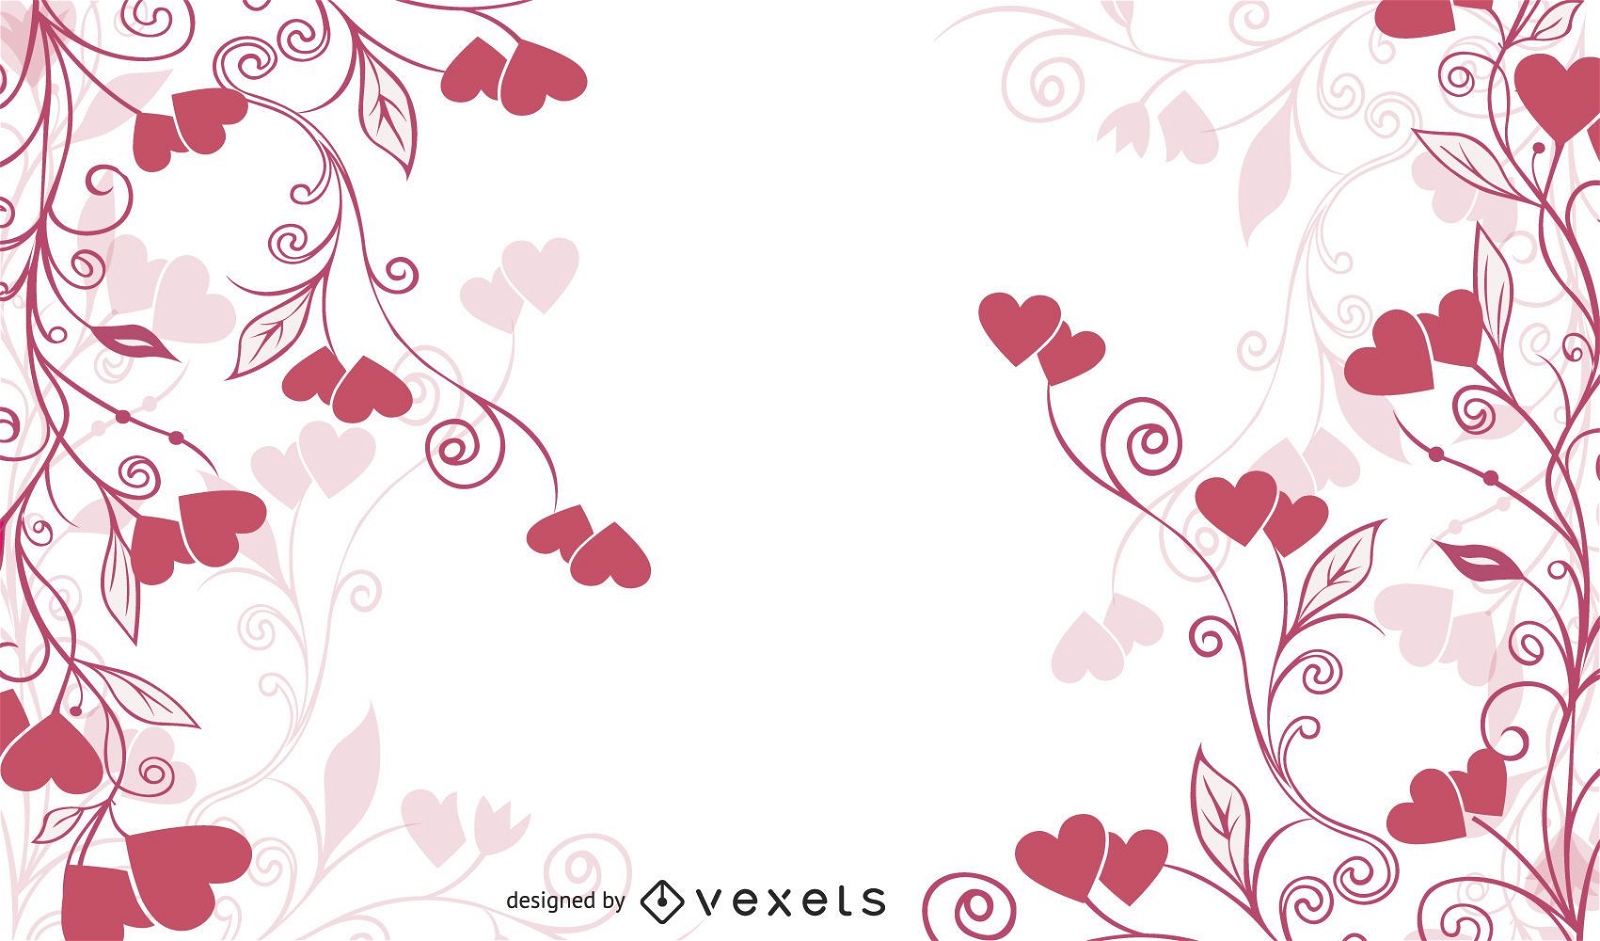 Swirling Floral & Heart Flat Red Background